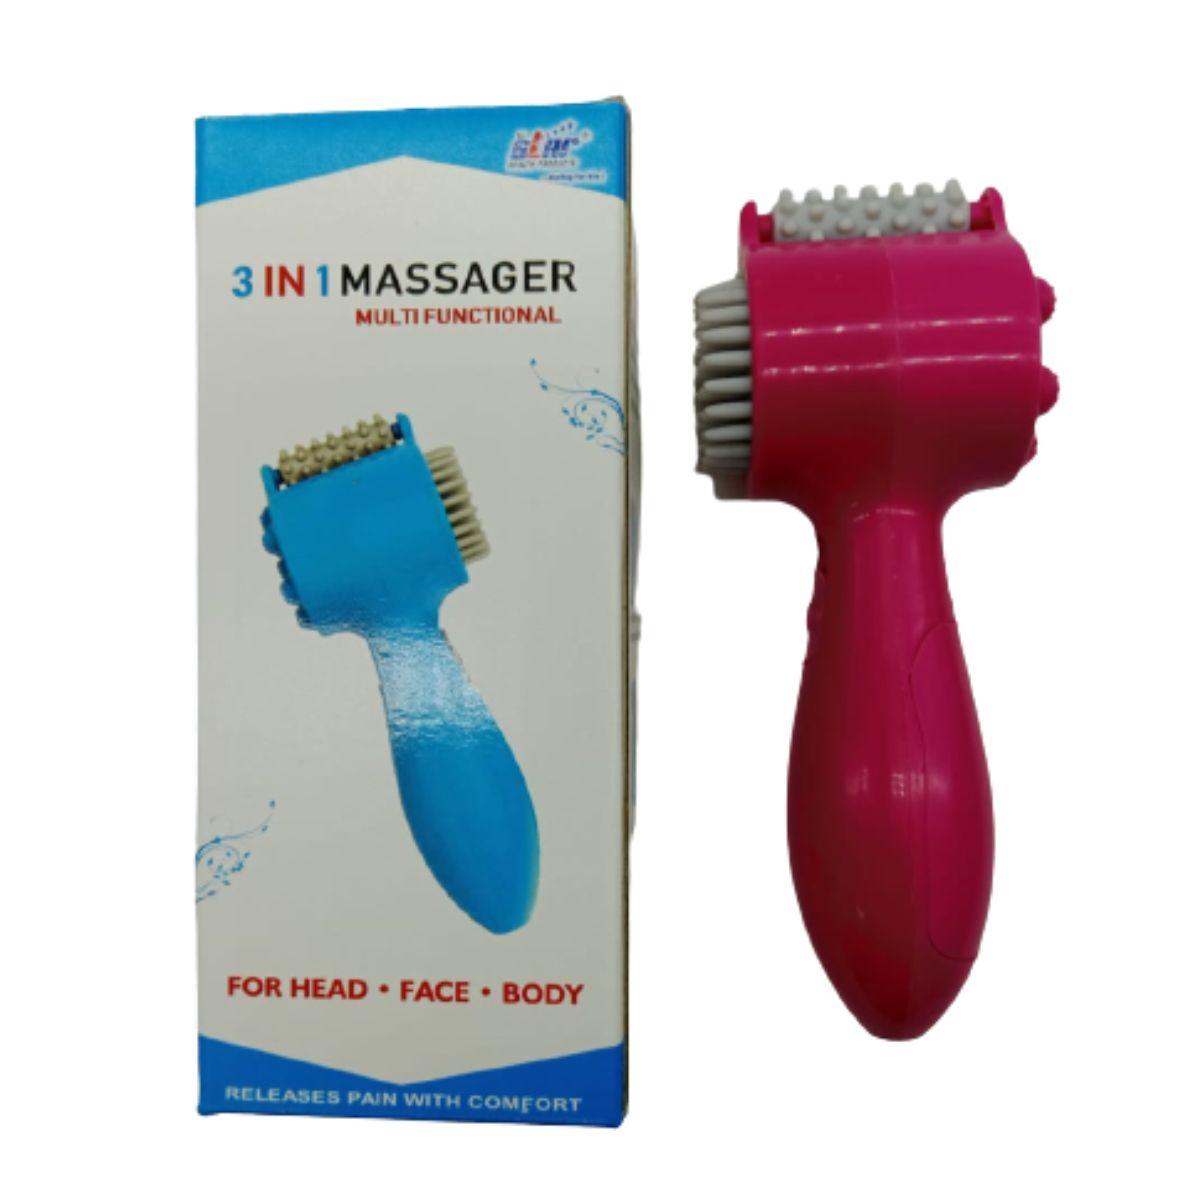 3 IN 1 Massager - tcistarhealthproducts